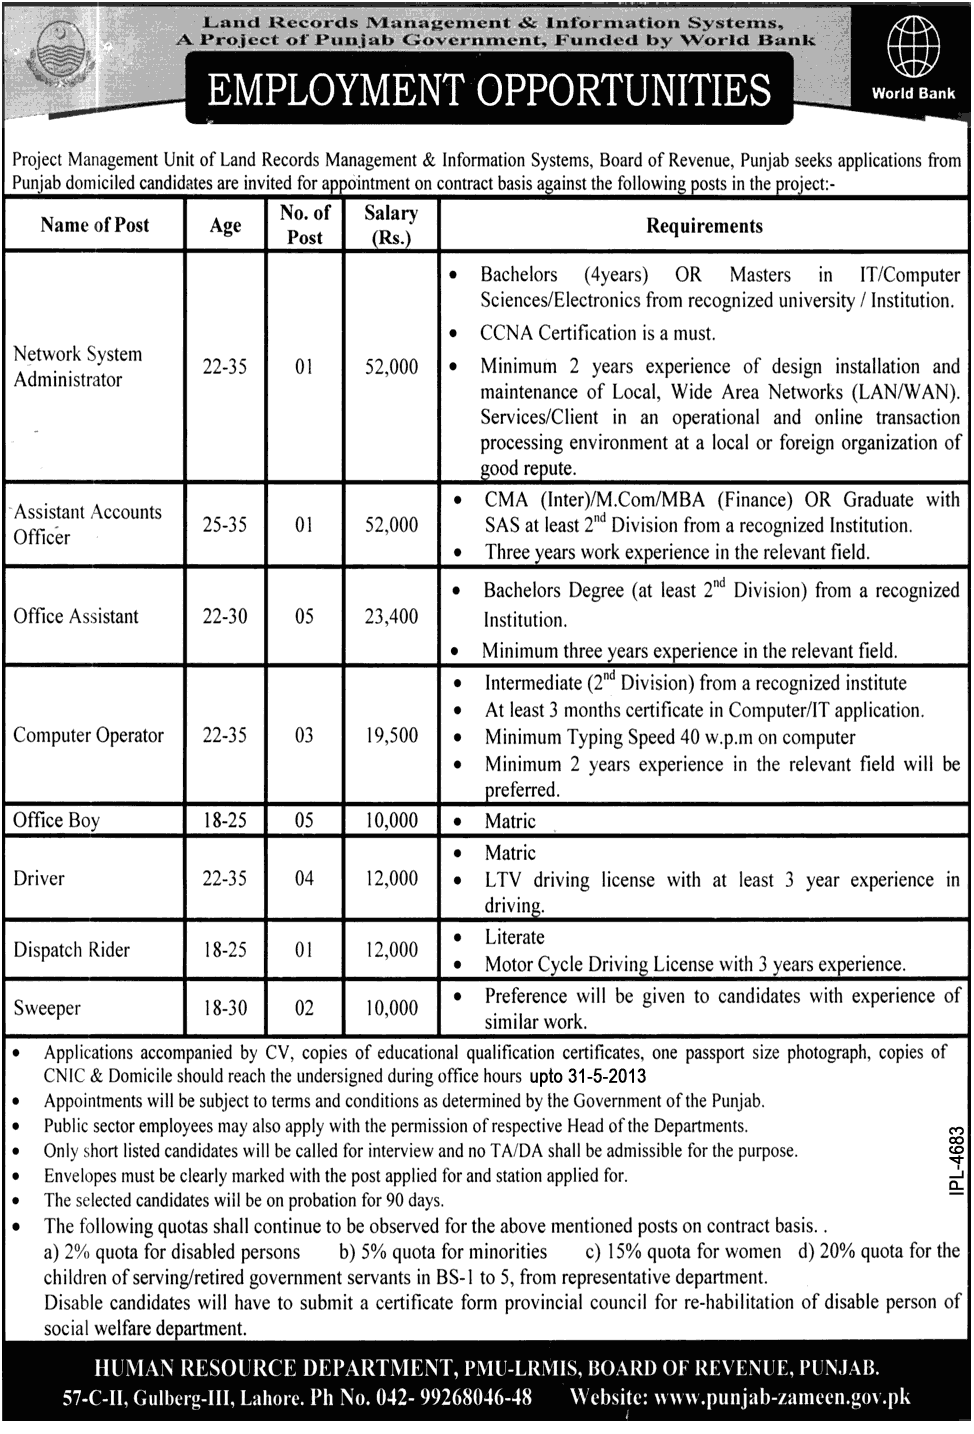 Jobs for Network Administrator & Office Assistant Required in Govt. of Pakistan